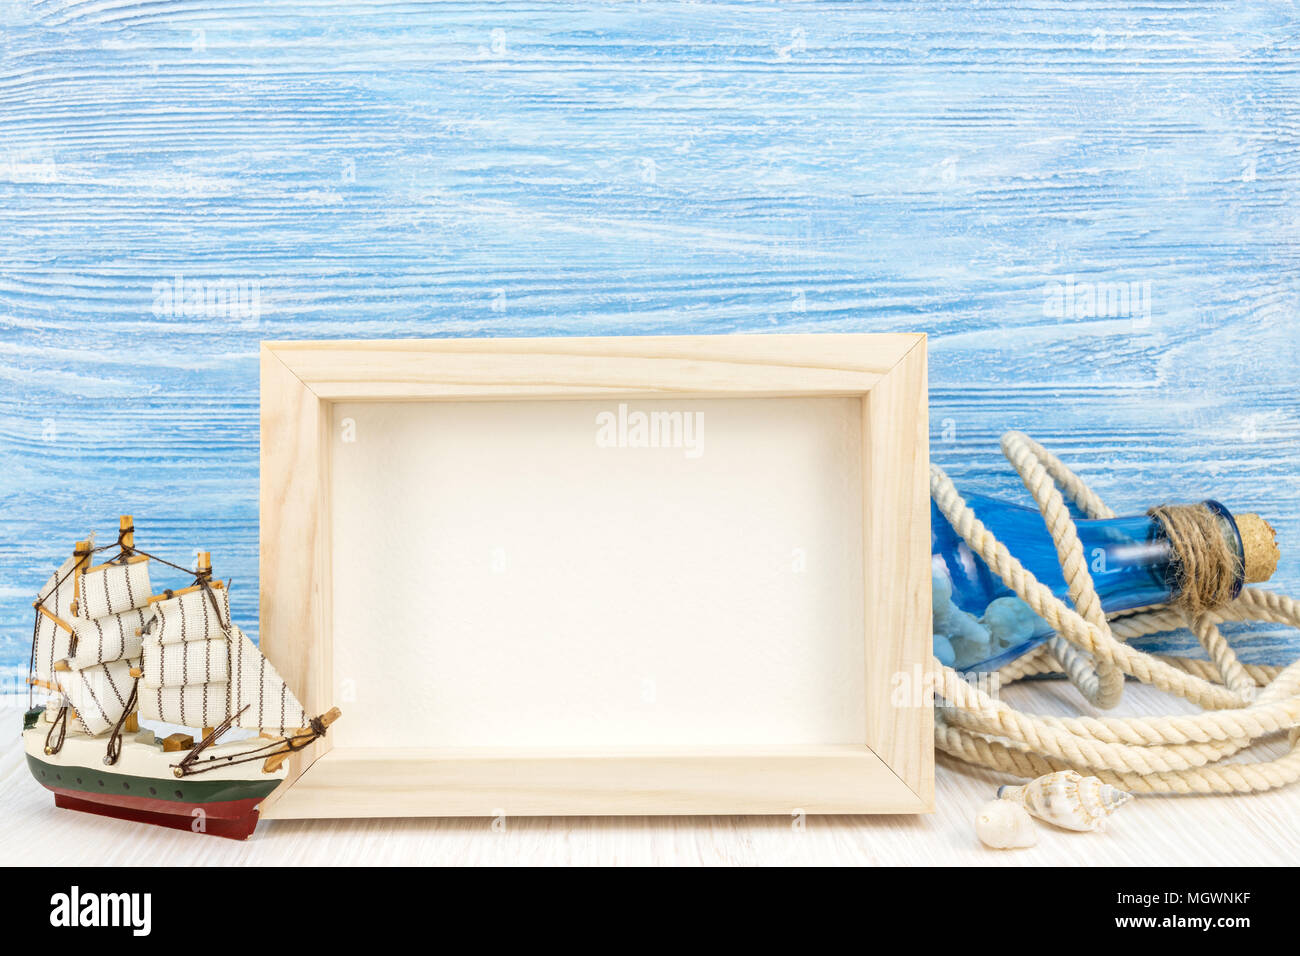 sea vacation background with photo frame, sailboat, rope and bottle against blue wooden boards Stock Photo